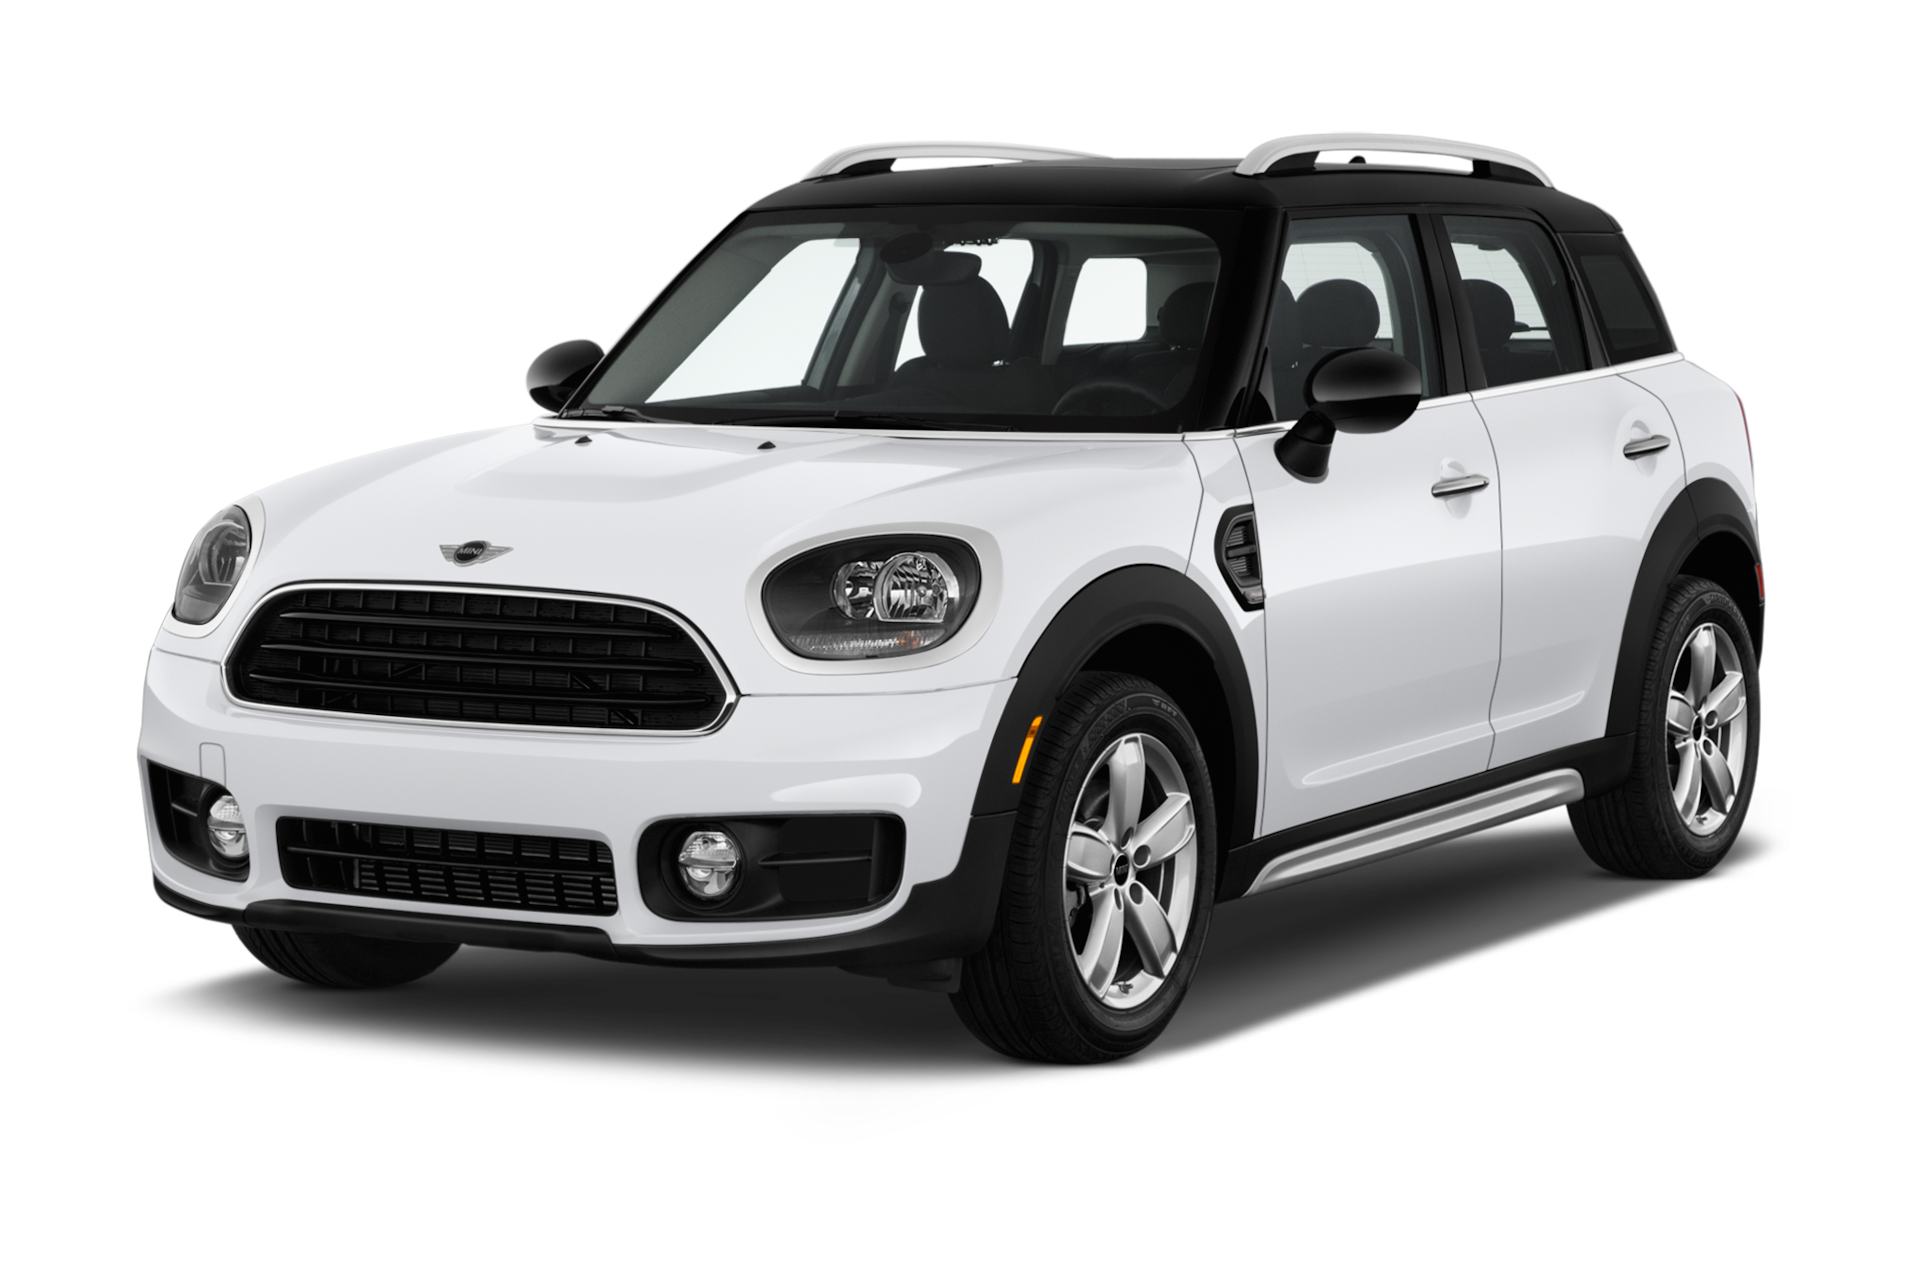 2018 MINI Countryman Prices, Reviews, and Photos - MotorTrend